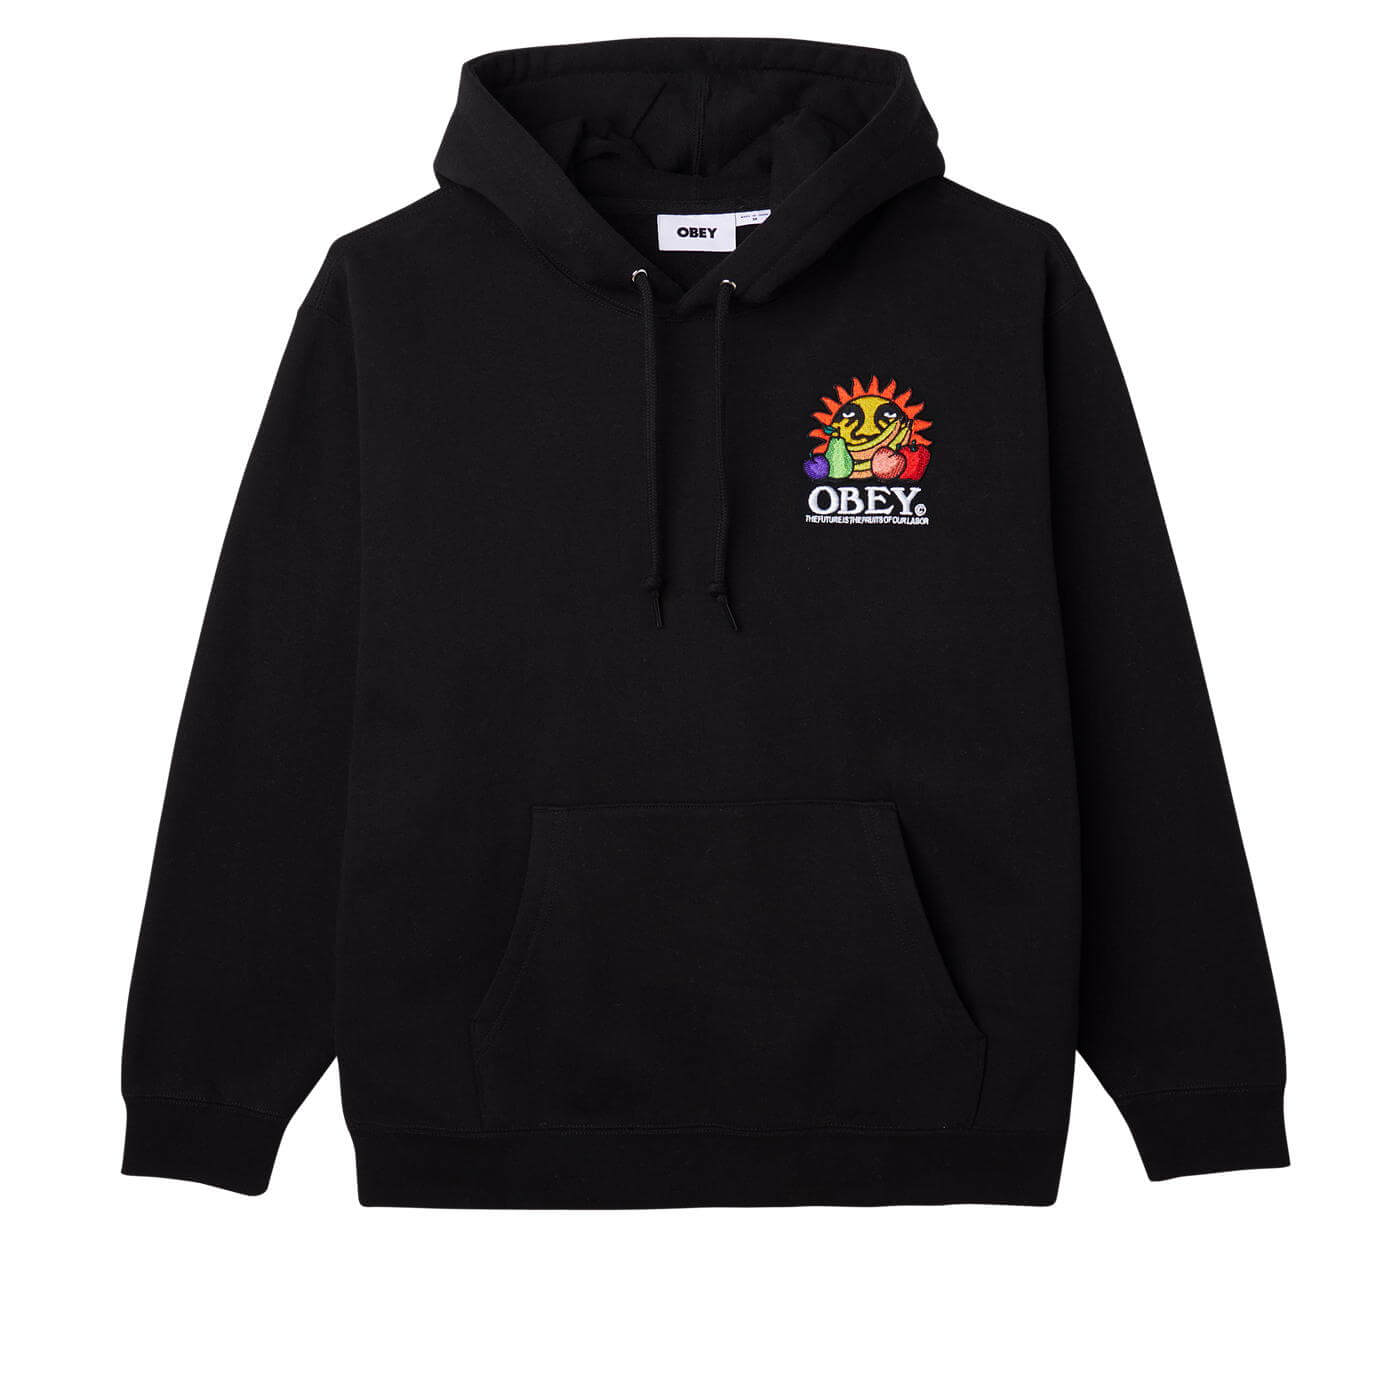 OBEY Our Labor Hoody (Black)